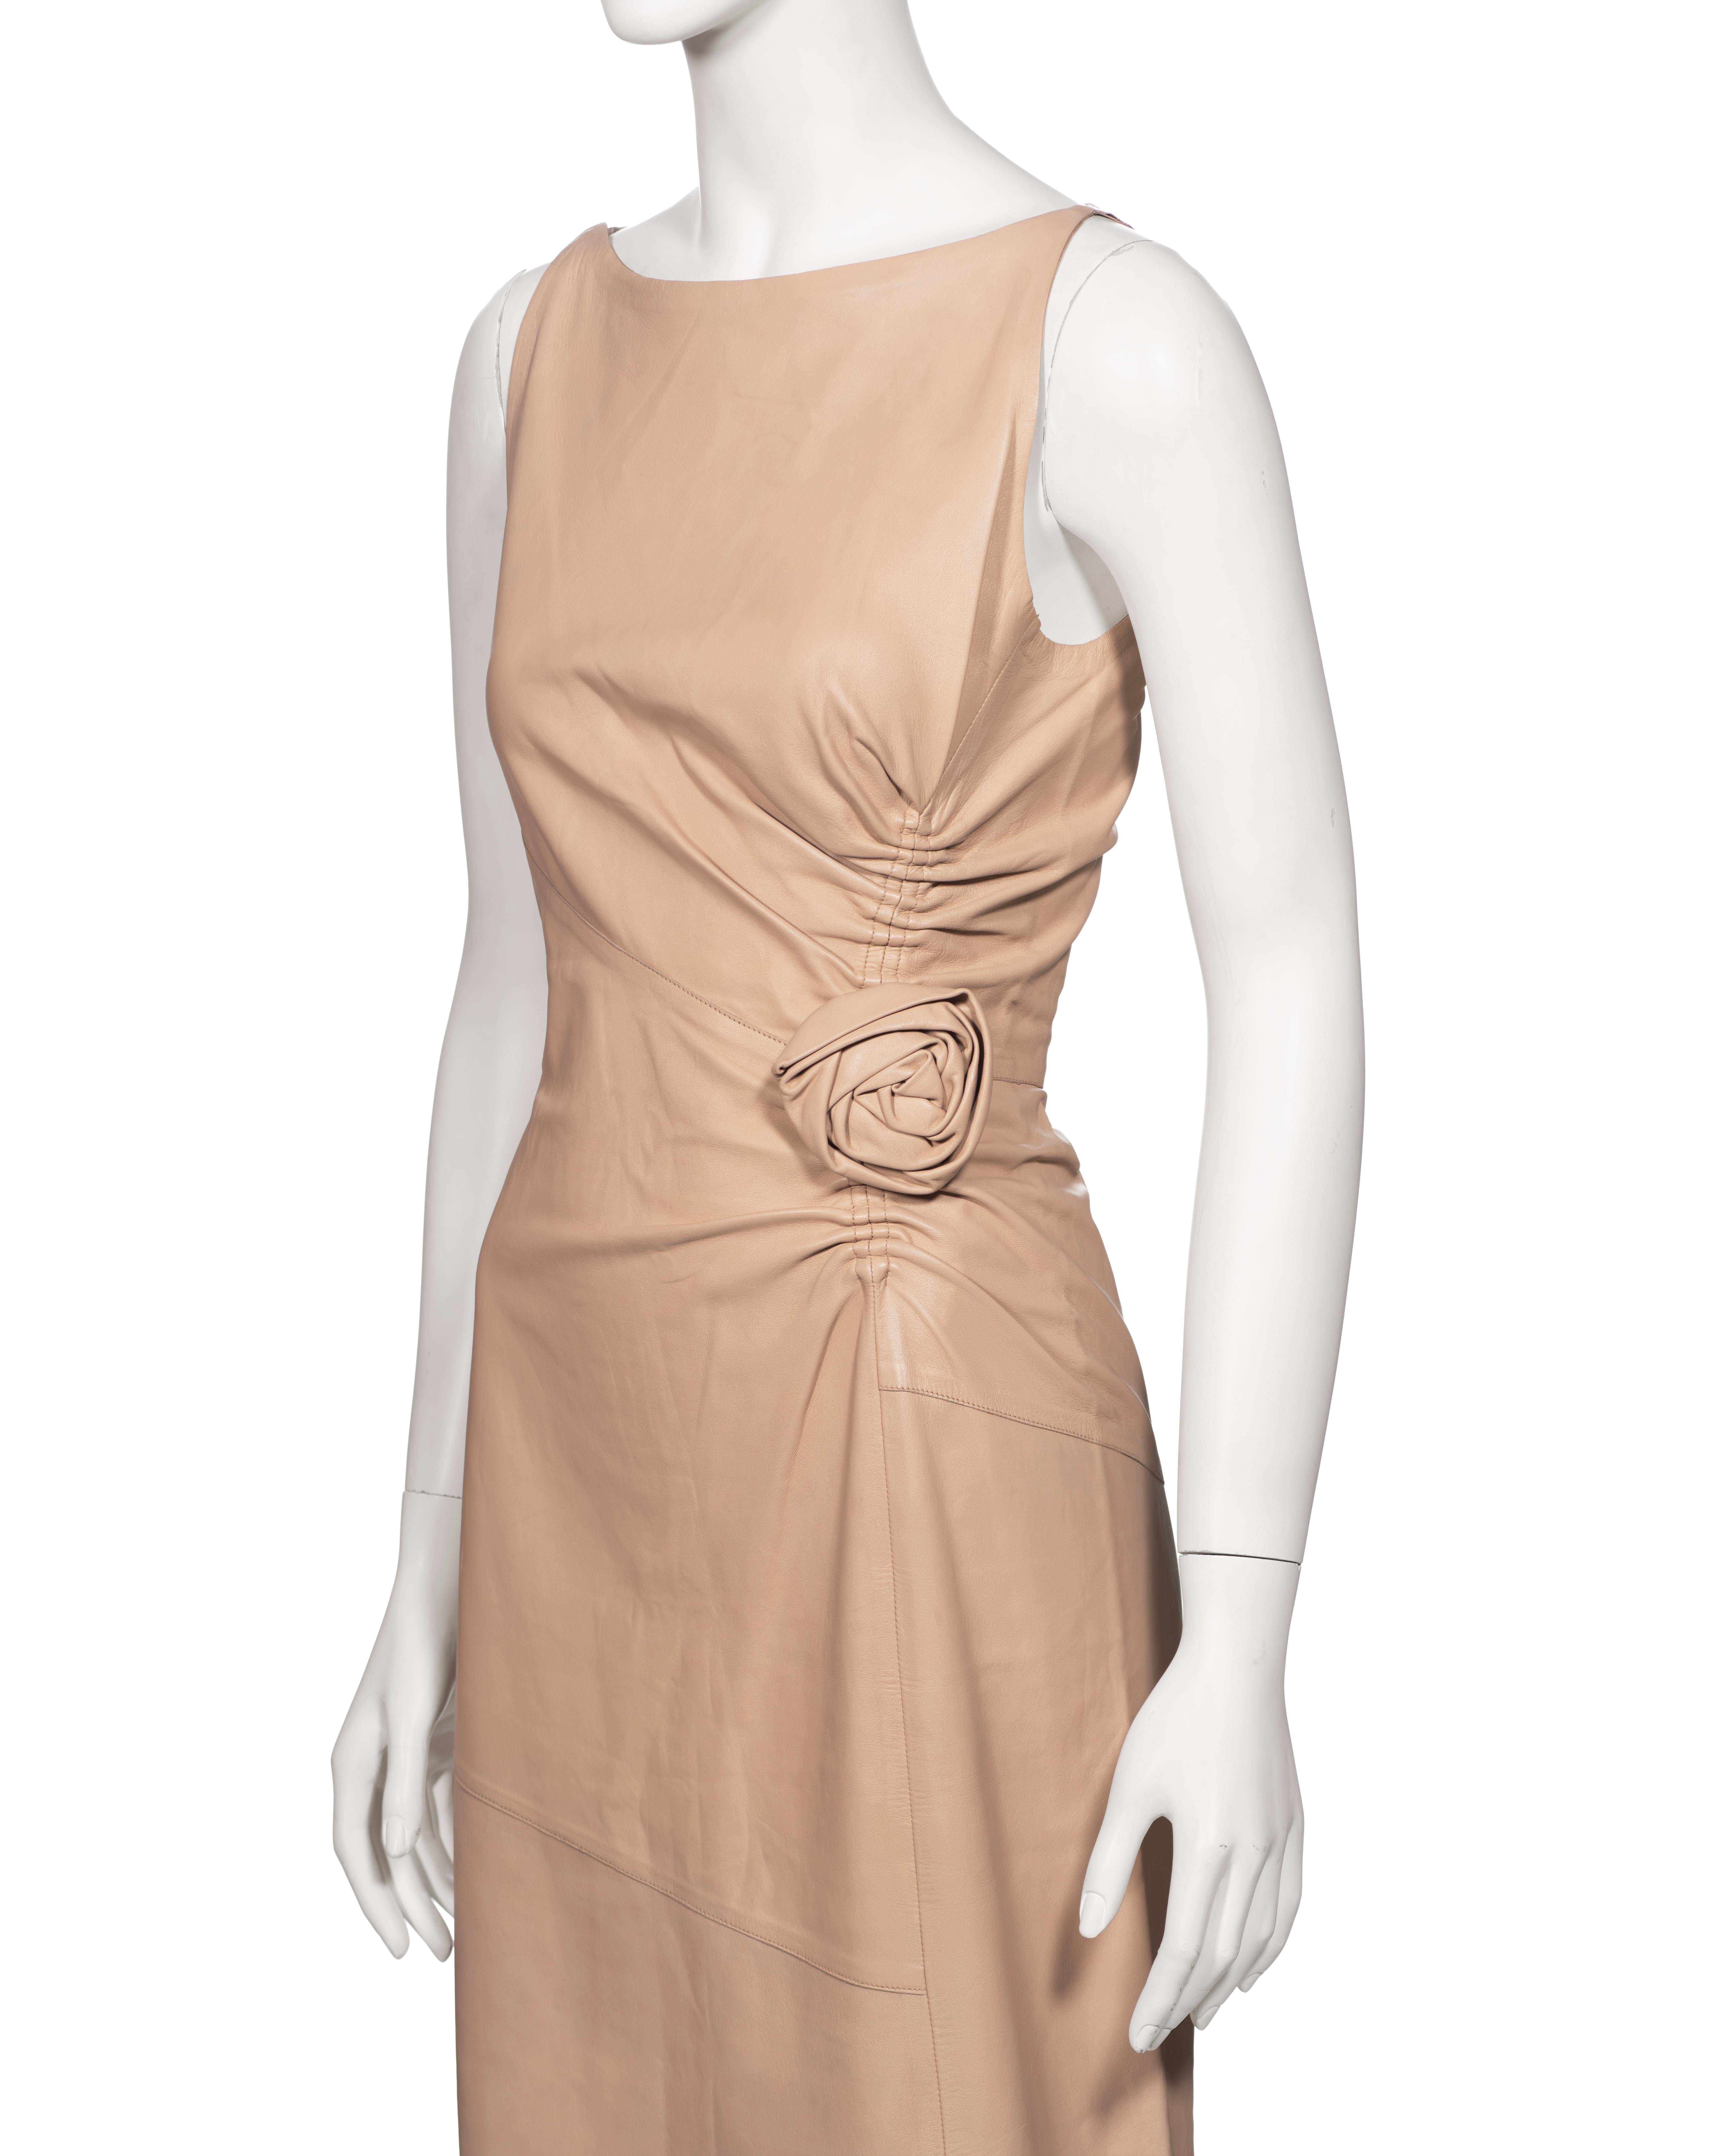 Gucci by Tom Ford Nude Leather Shift Dress with Rosette, fw 1999 For Sale 3